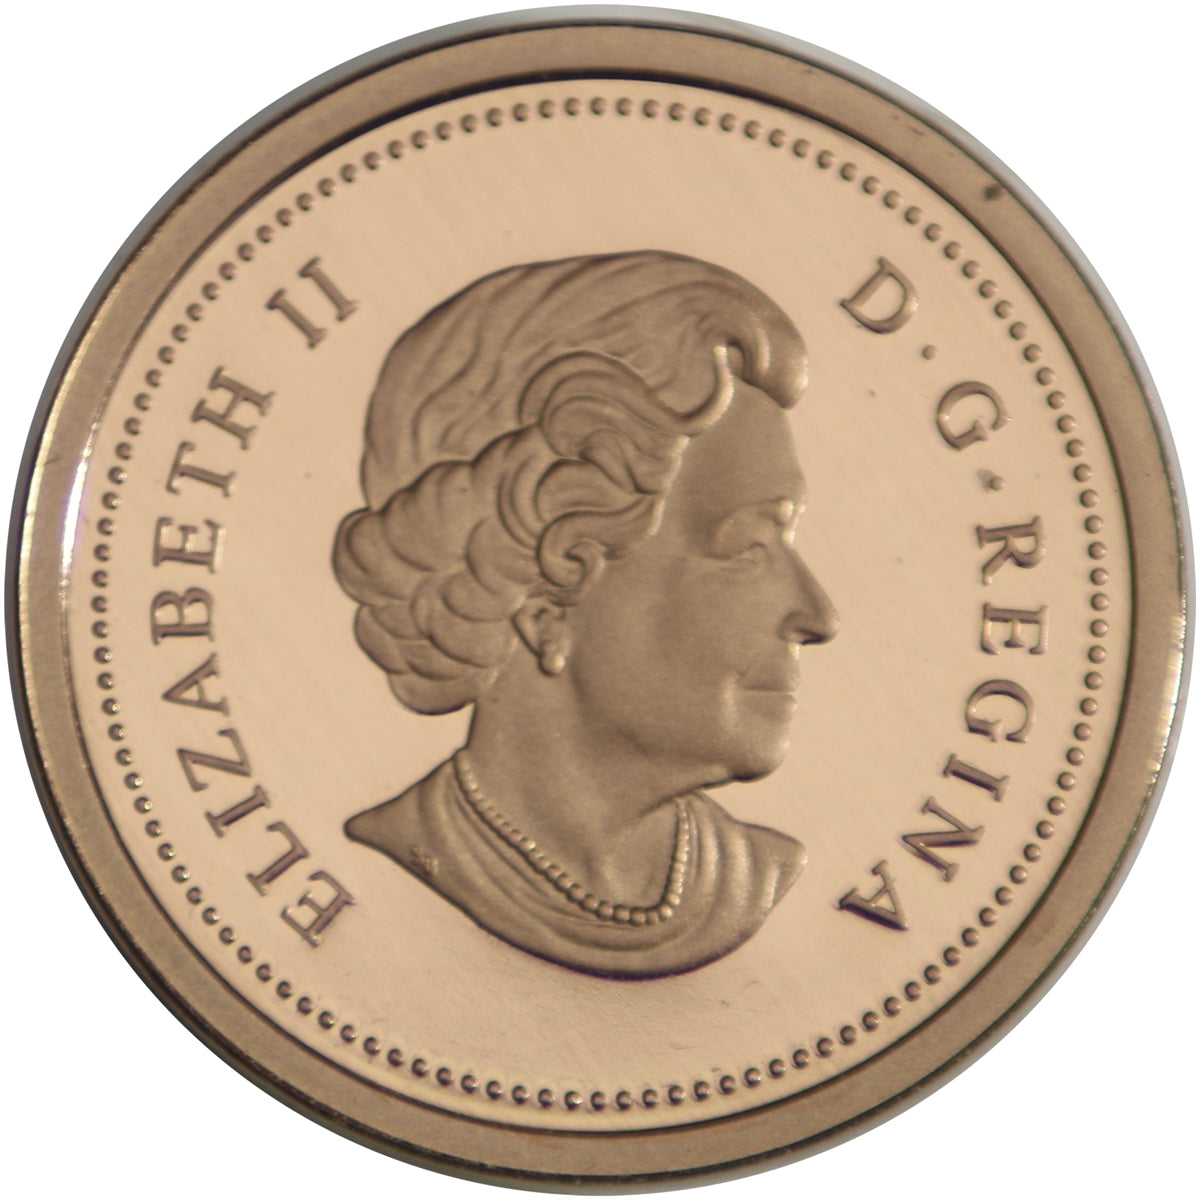 2005 Canada 1-cent Proof